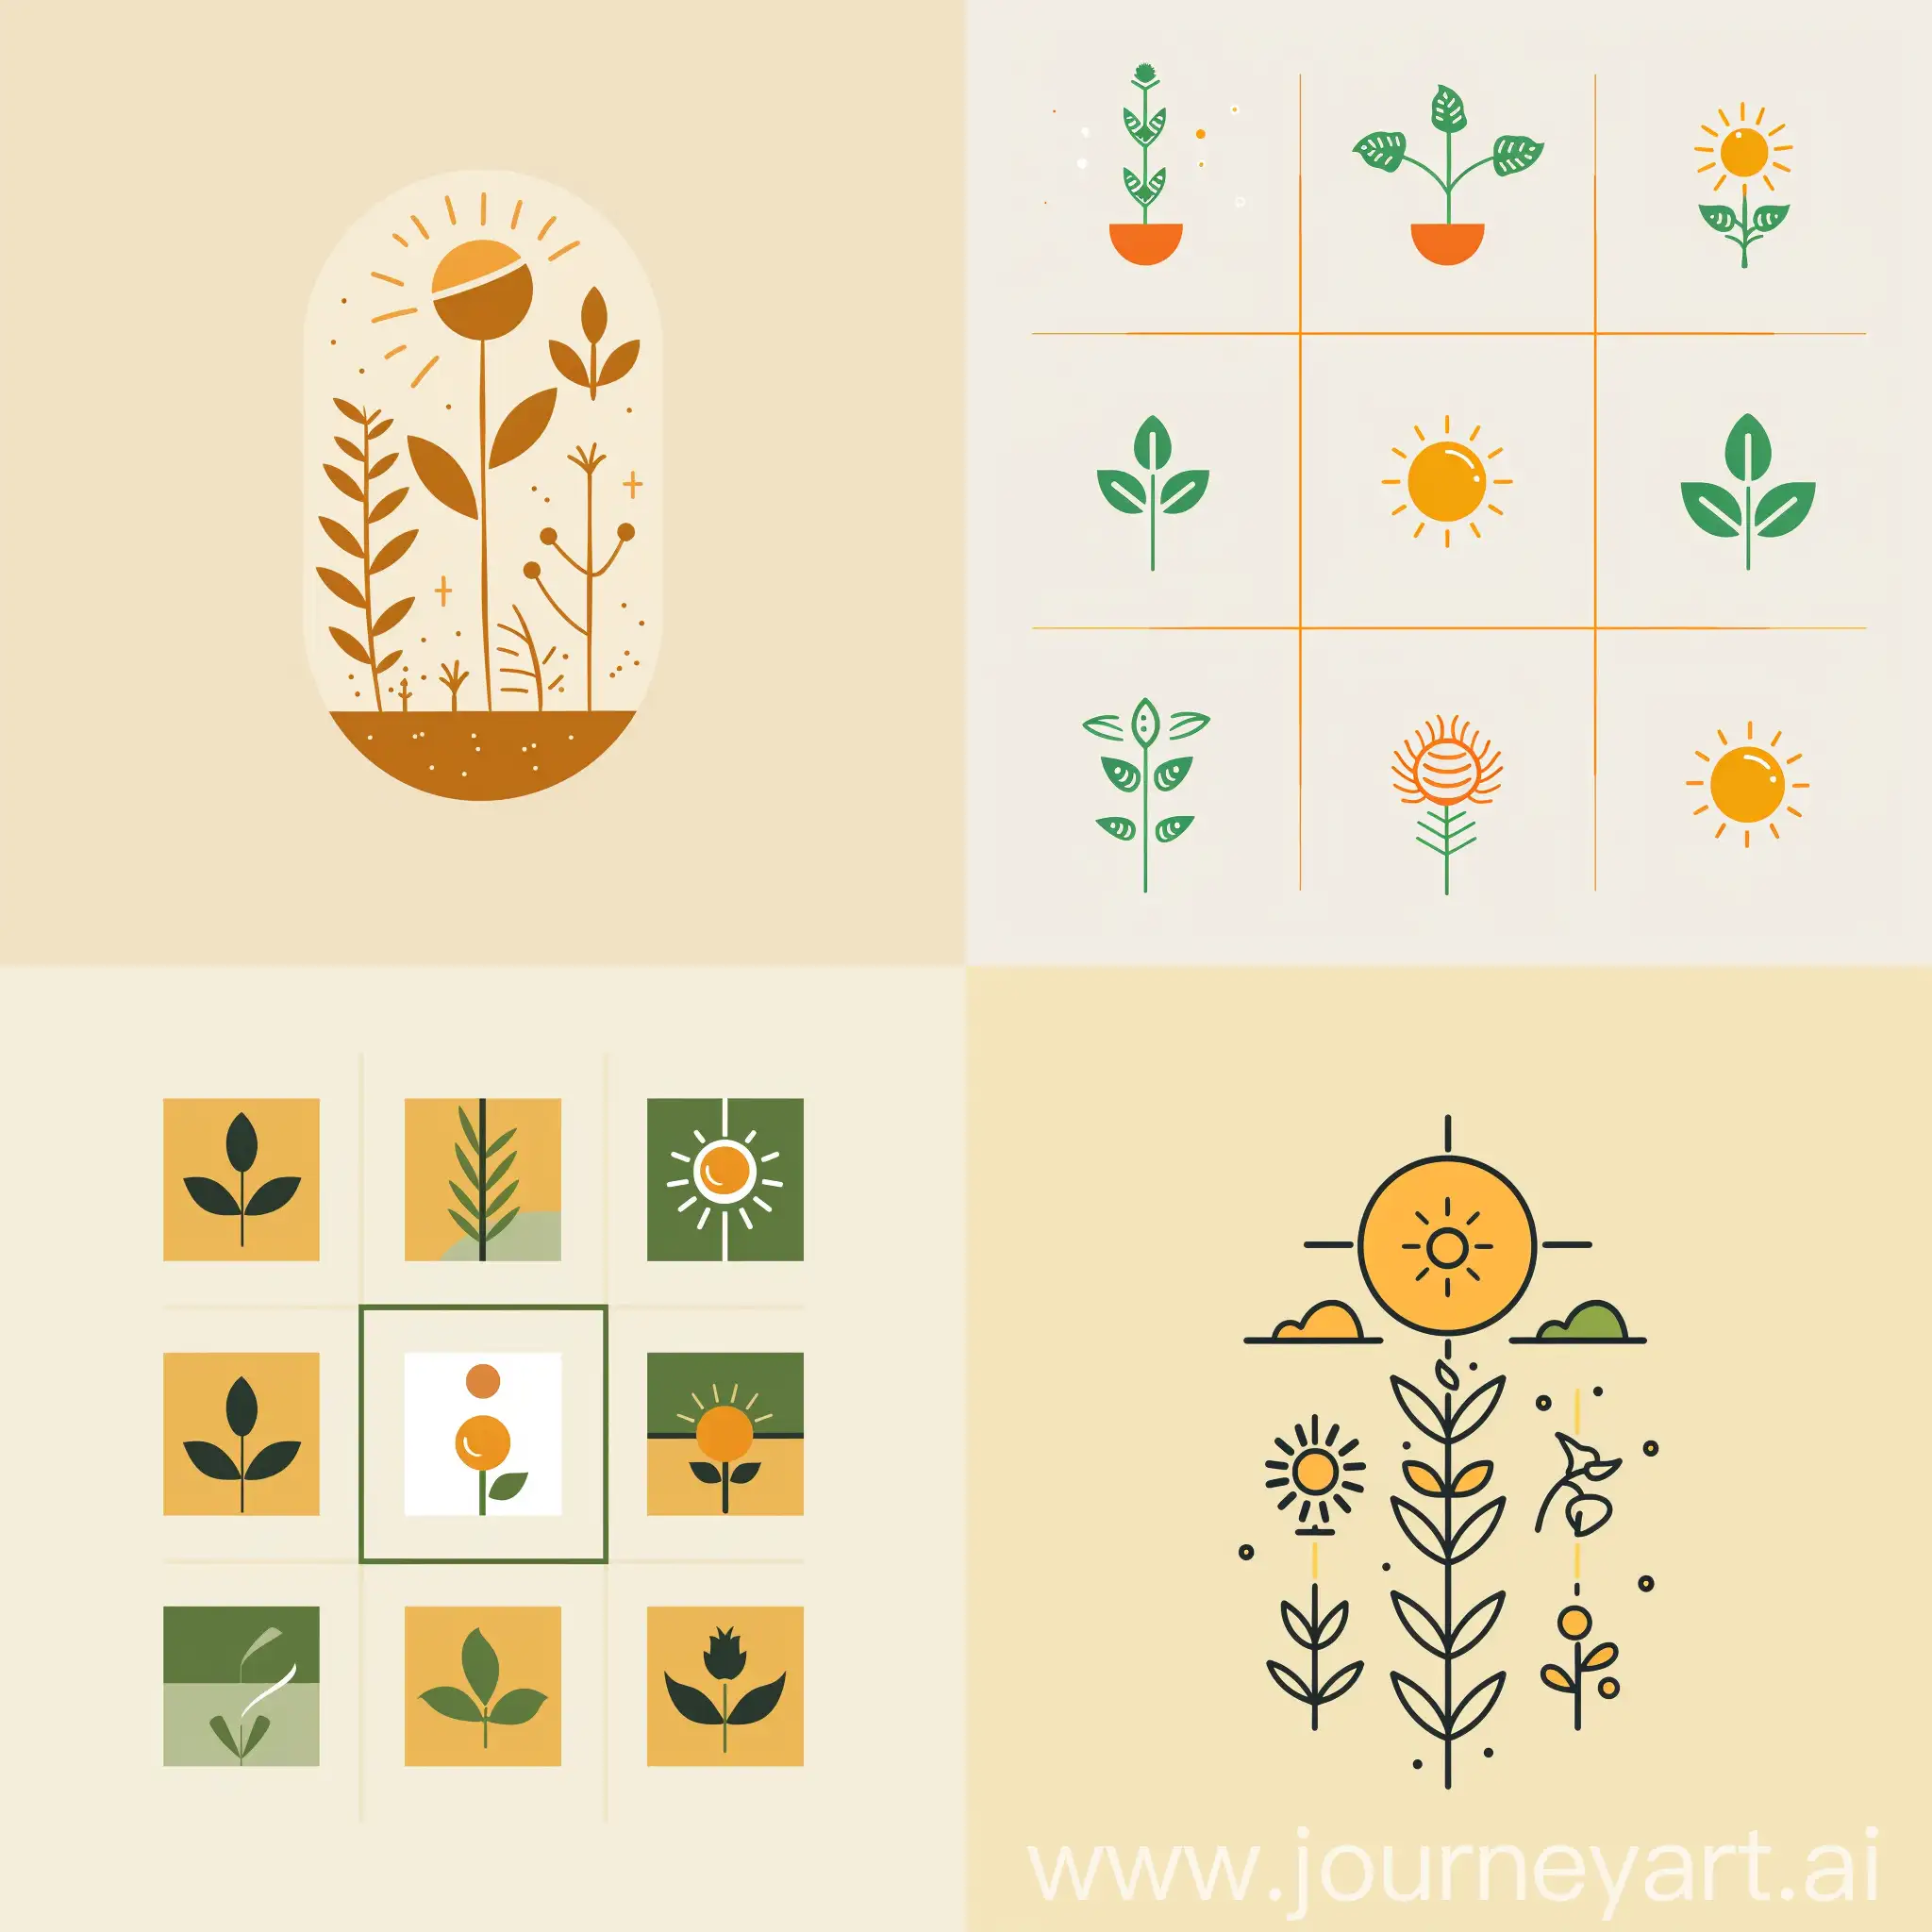 Please create a logo for a fertiliser brand called "Darat Kencana" in the style of Dieter Rams. Make it unique, simple, yet creative. incorporate icons of plants and the sun. Please generate 9 different options